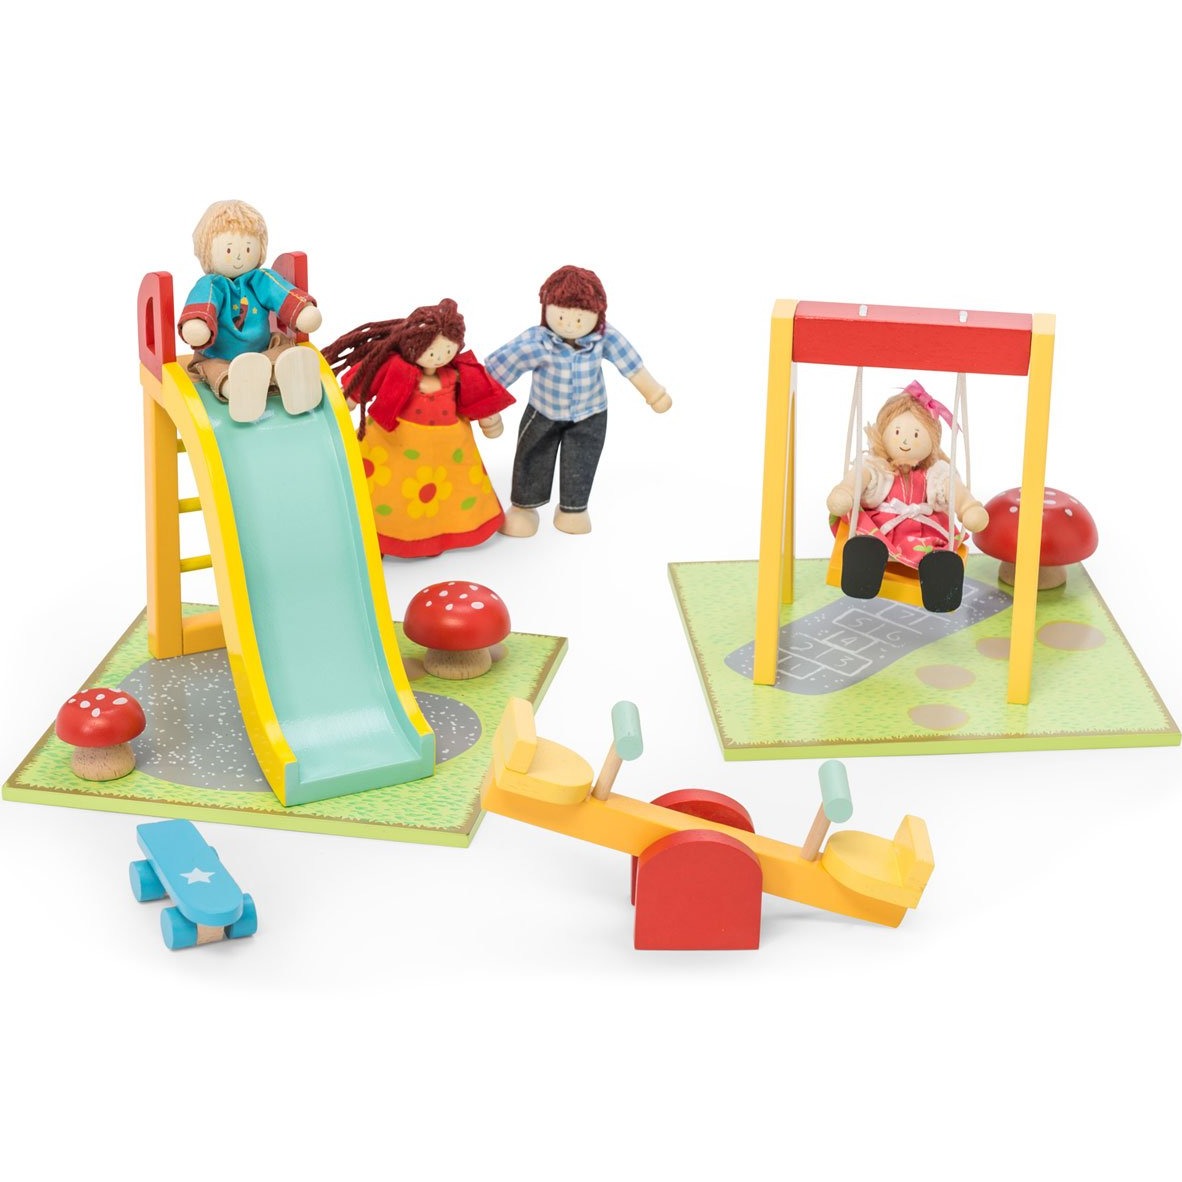 ME076 - Furniture Playsets